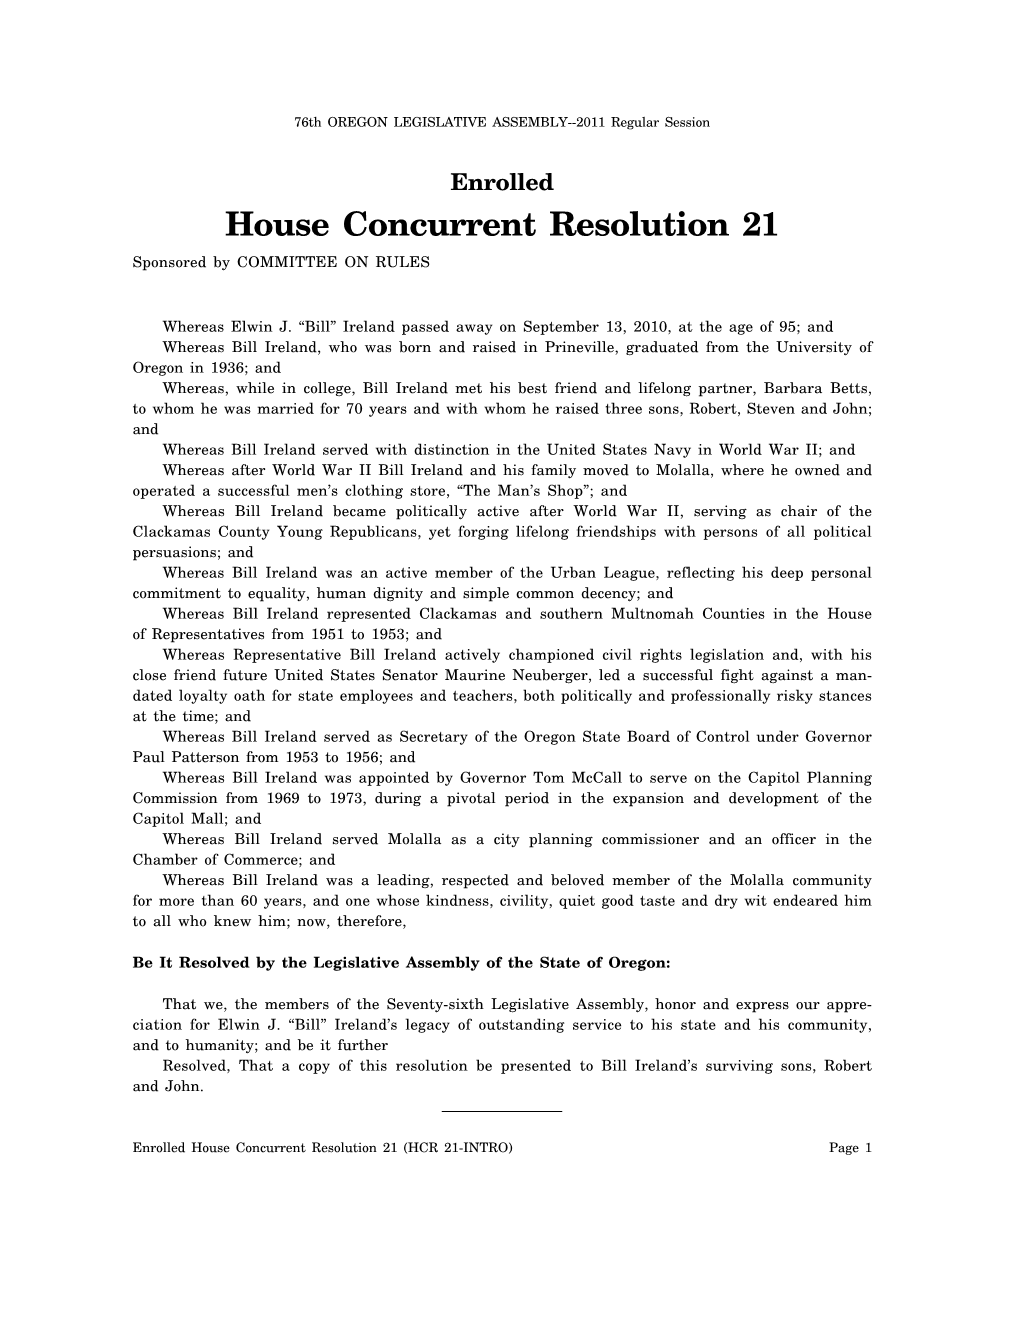 House Concurrent Resolution 21 Sponsored by COMMITTEE on RULES